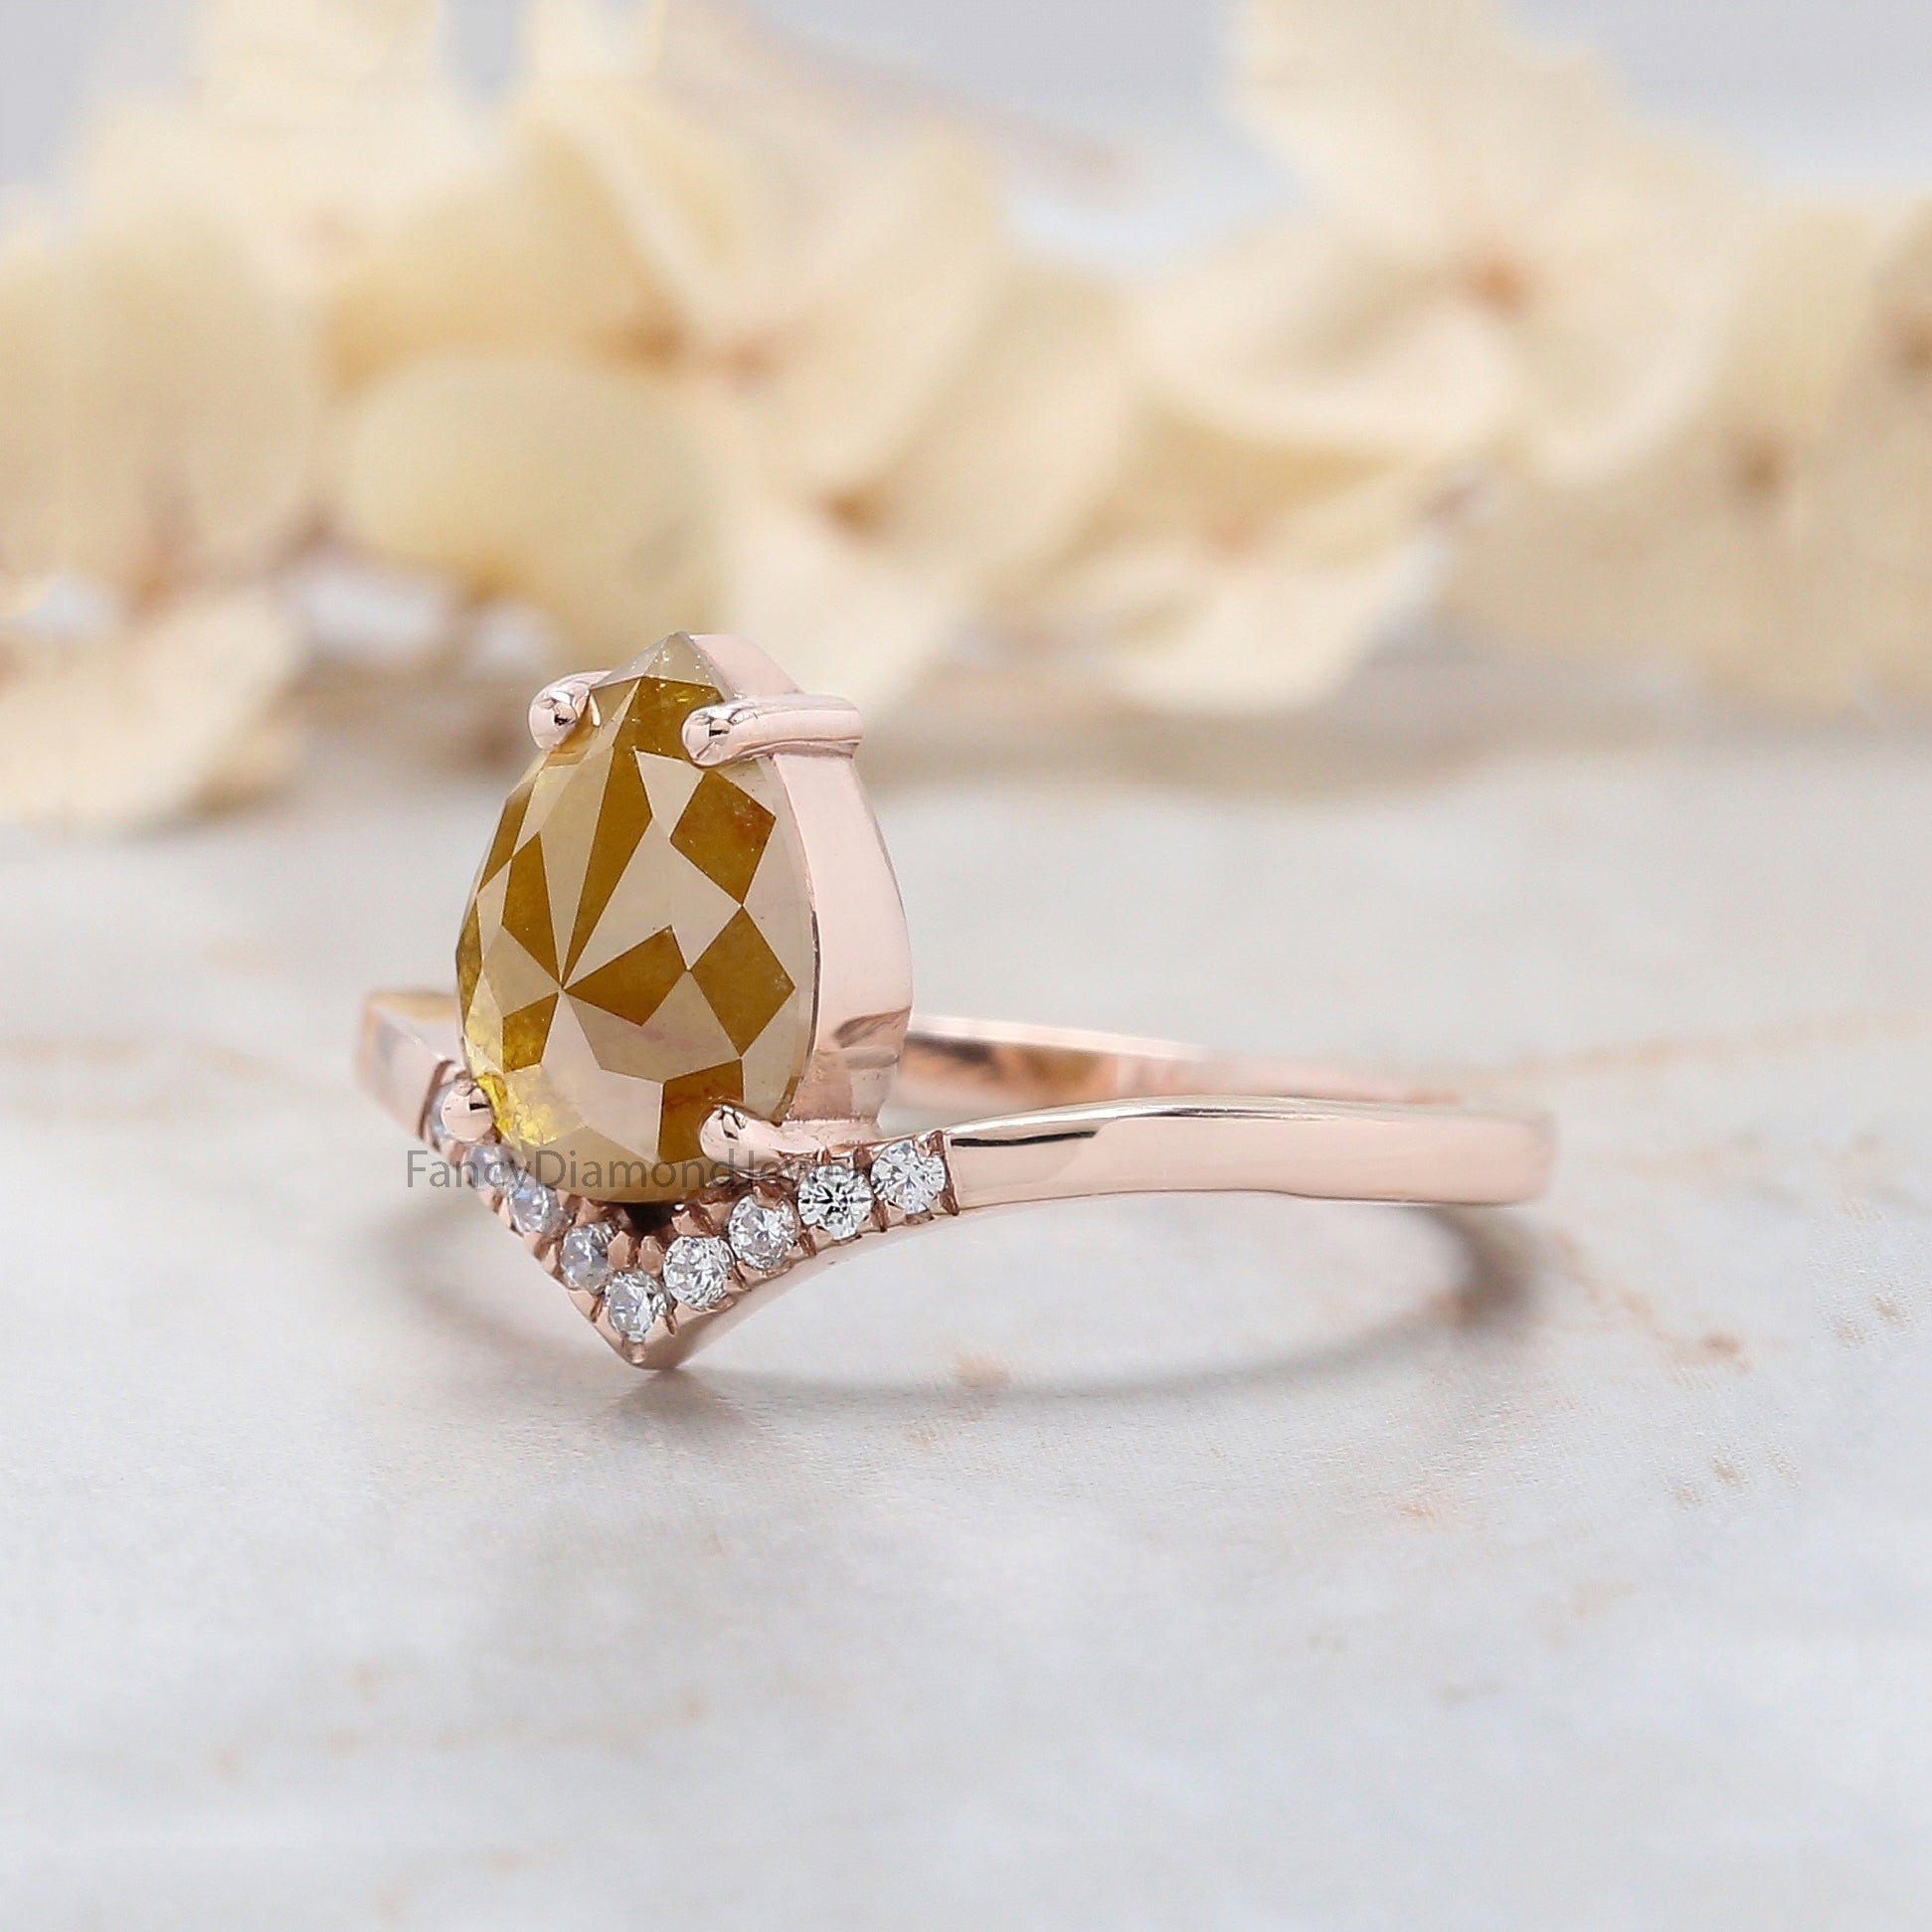 Pear Cut Yellow Color Diamond Ring 1.60 Ct 9.40 MM Pear Shape Diamond Ring 14K Solid Rose Gold Silver Engagement Ring Gift For Her QK2263